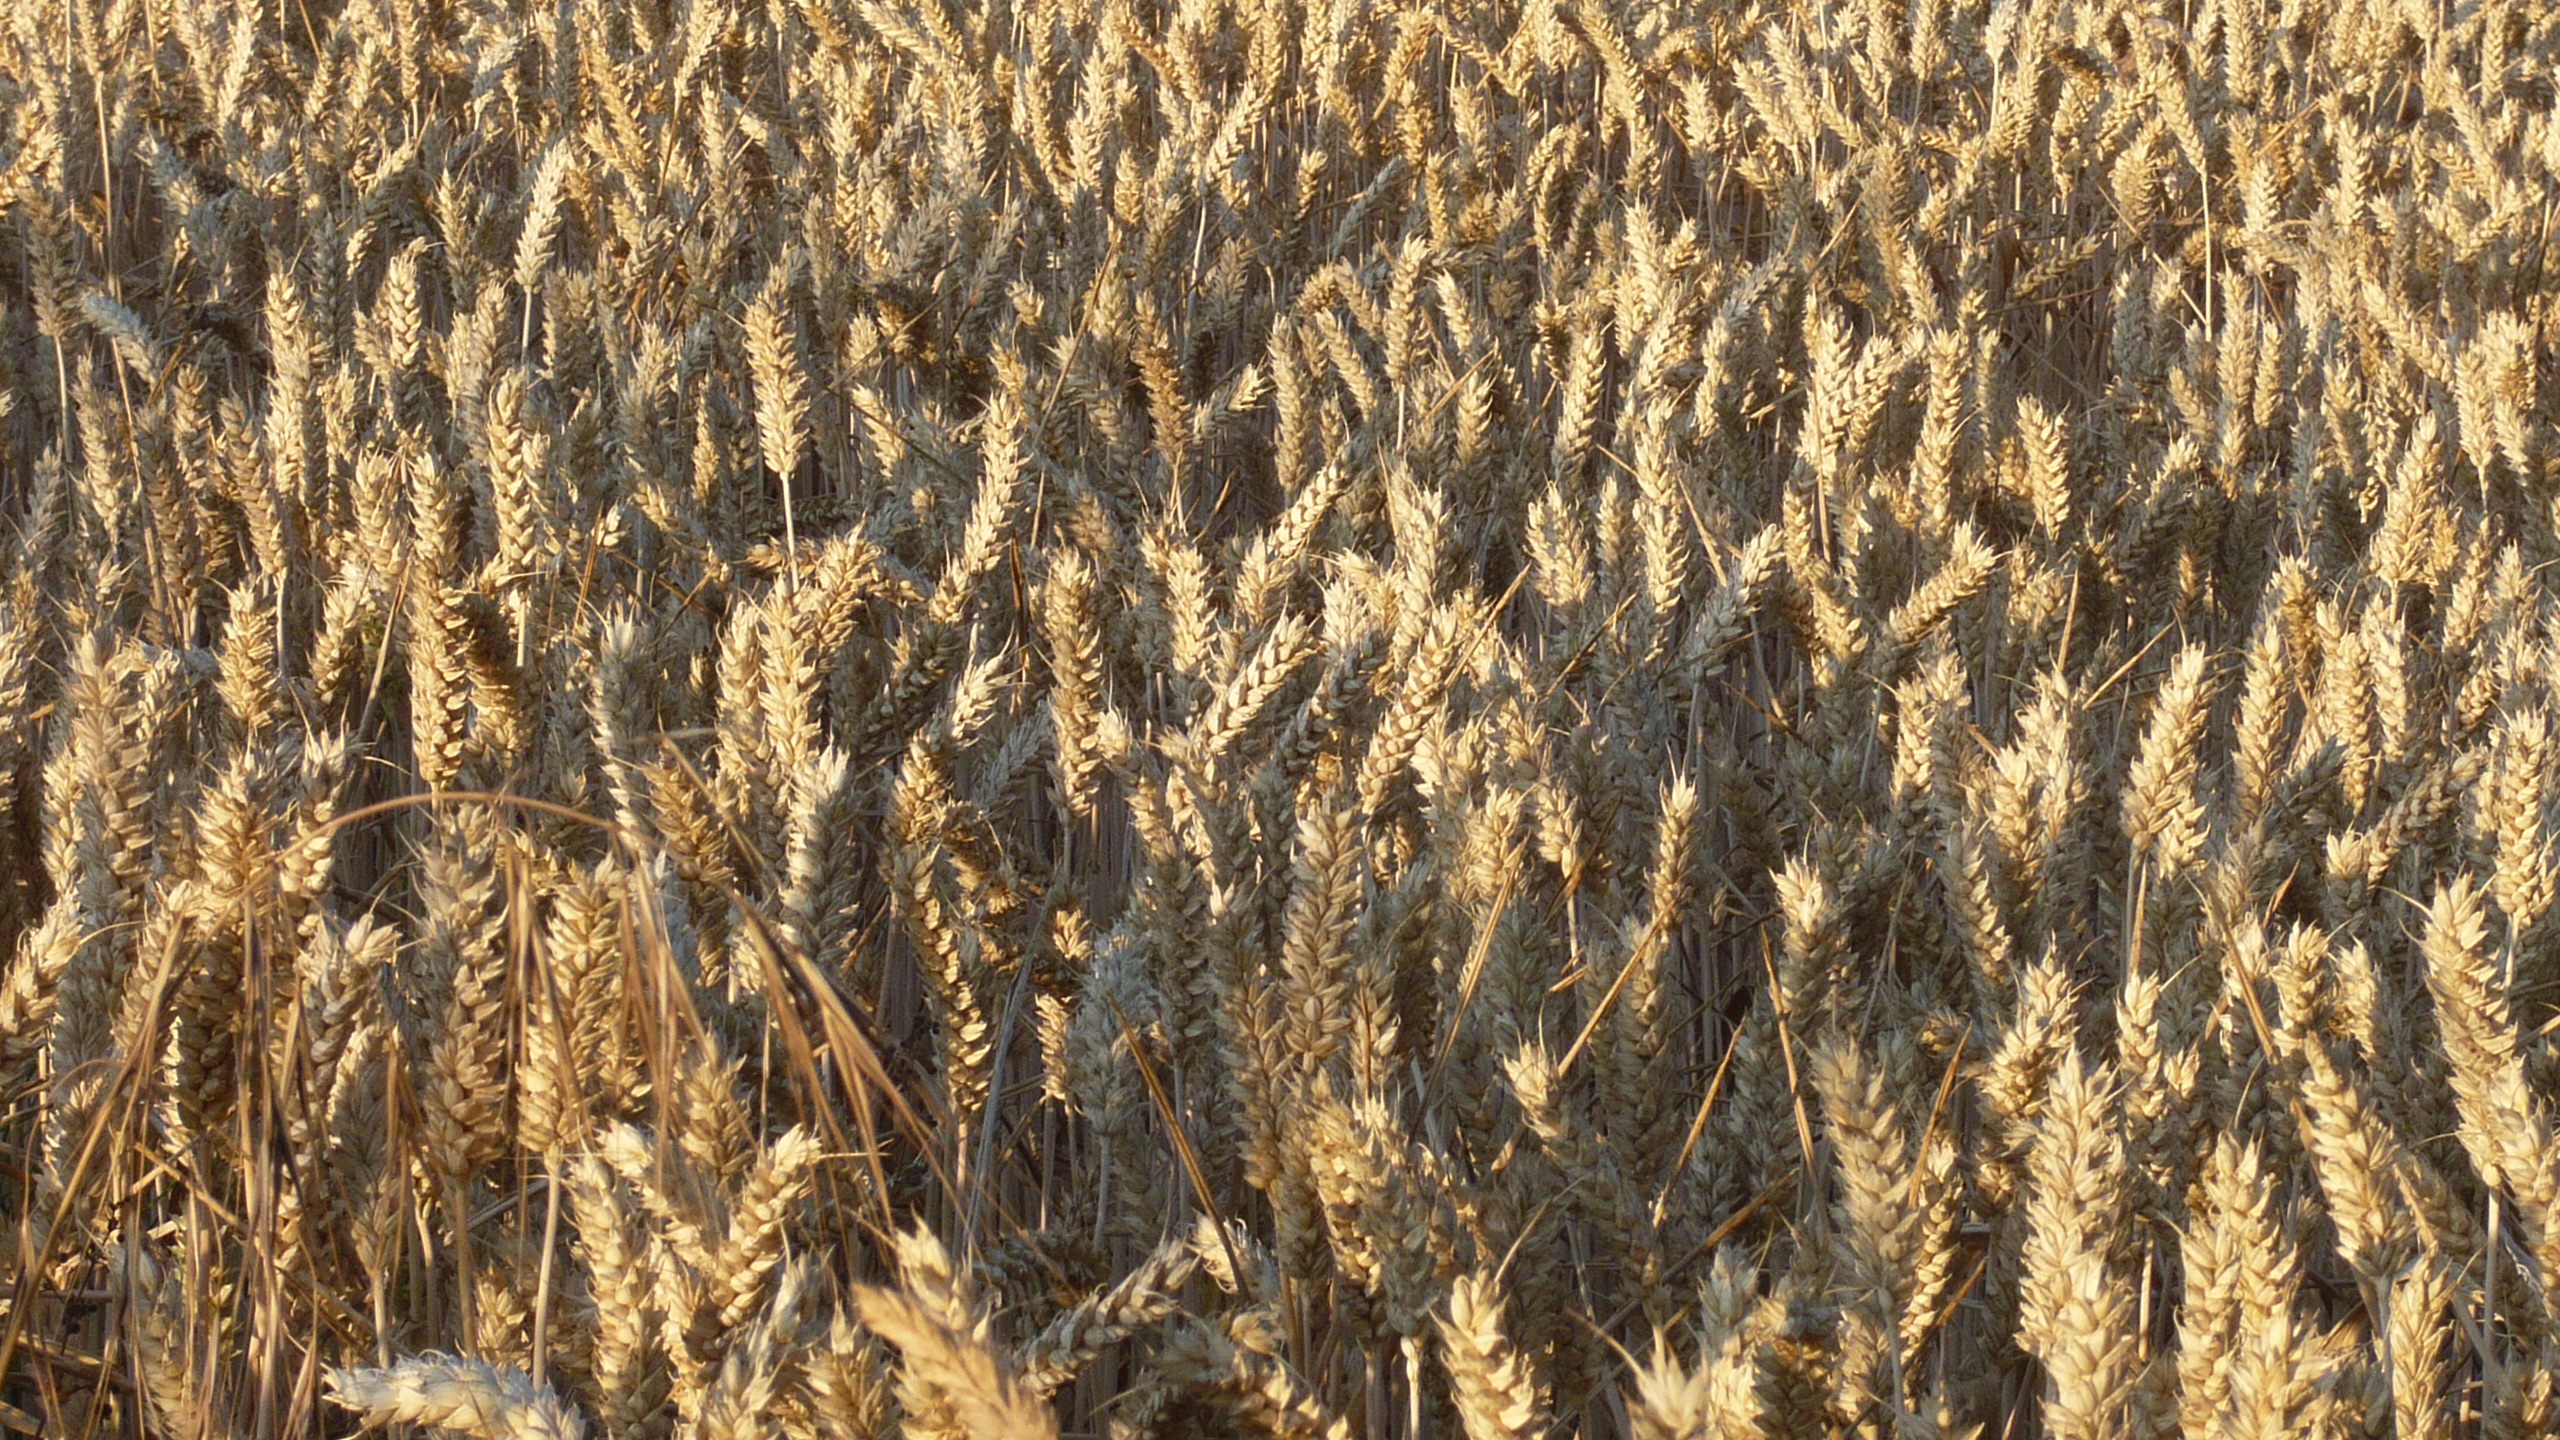 A ripened field of wheat in the Parish waiting harvest